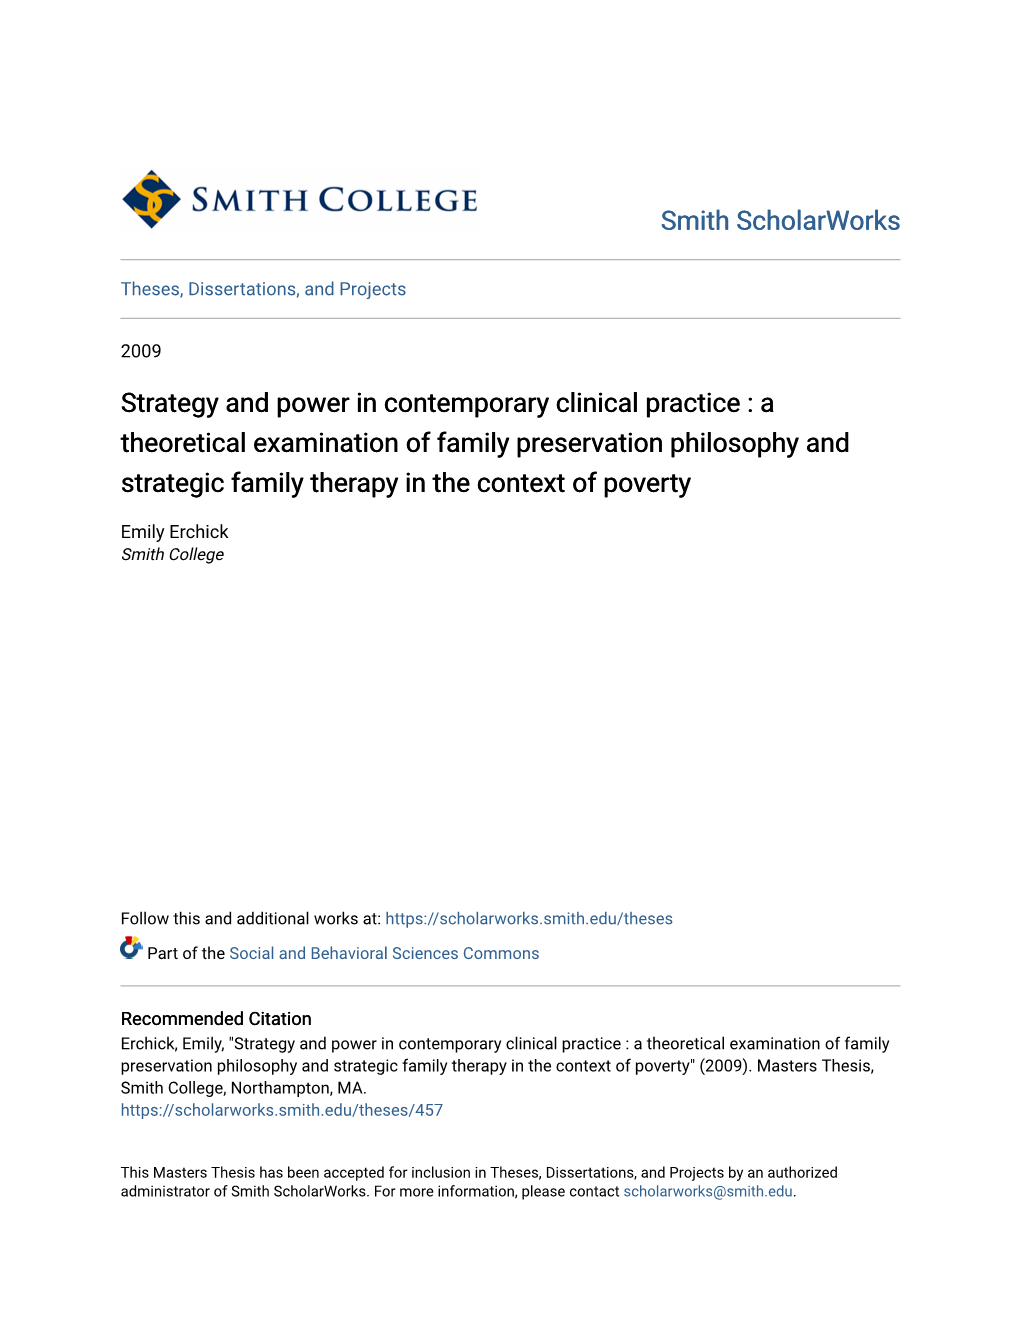 A Theoretical Examination of Family Preservation Philosophy and Strategic Family Therapy in the Context of Poverty